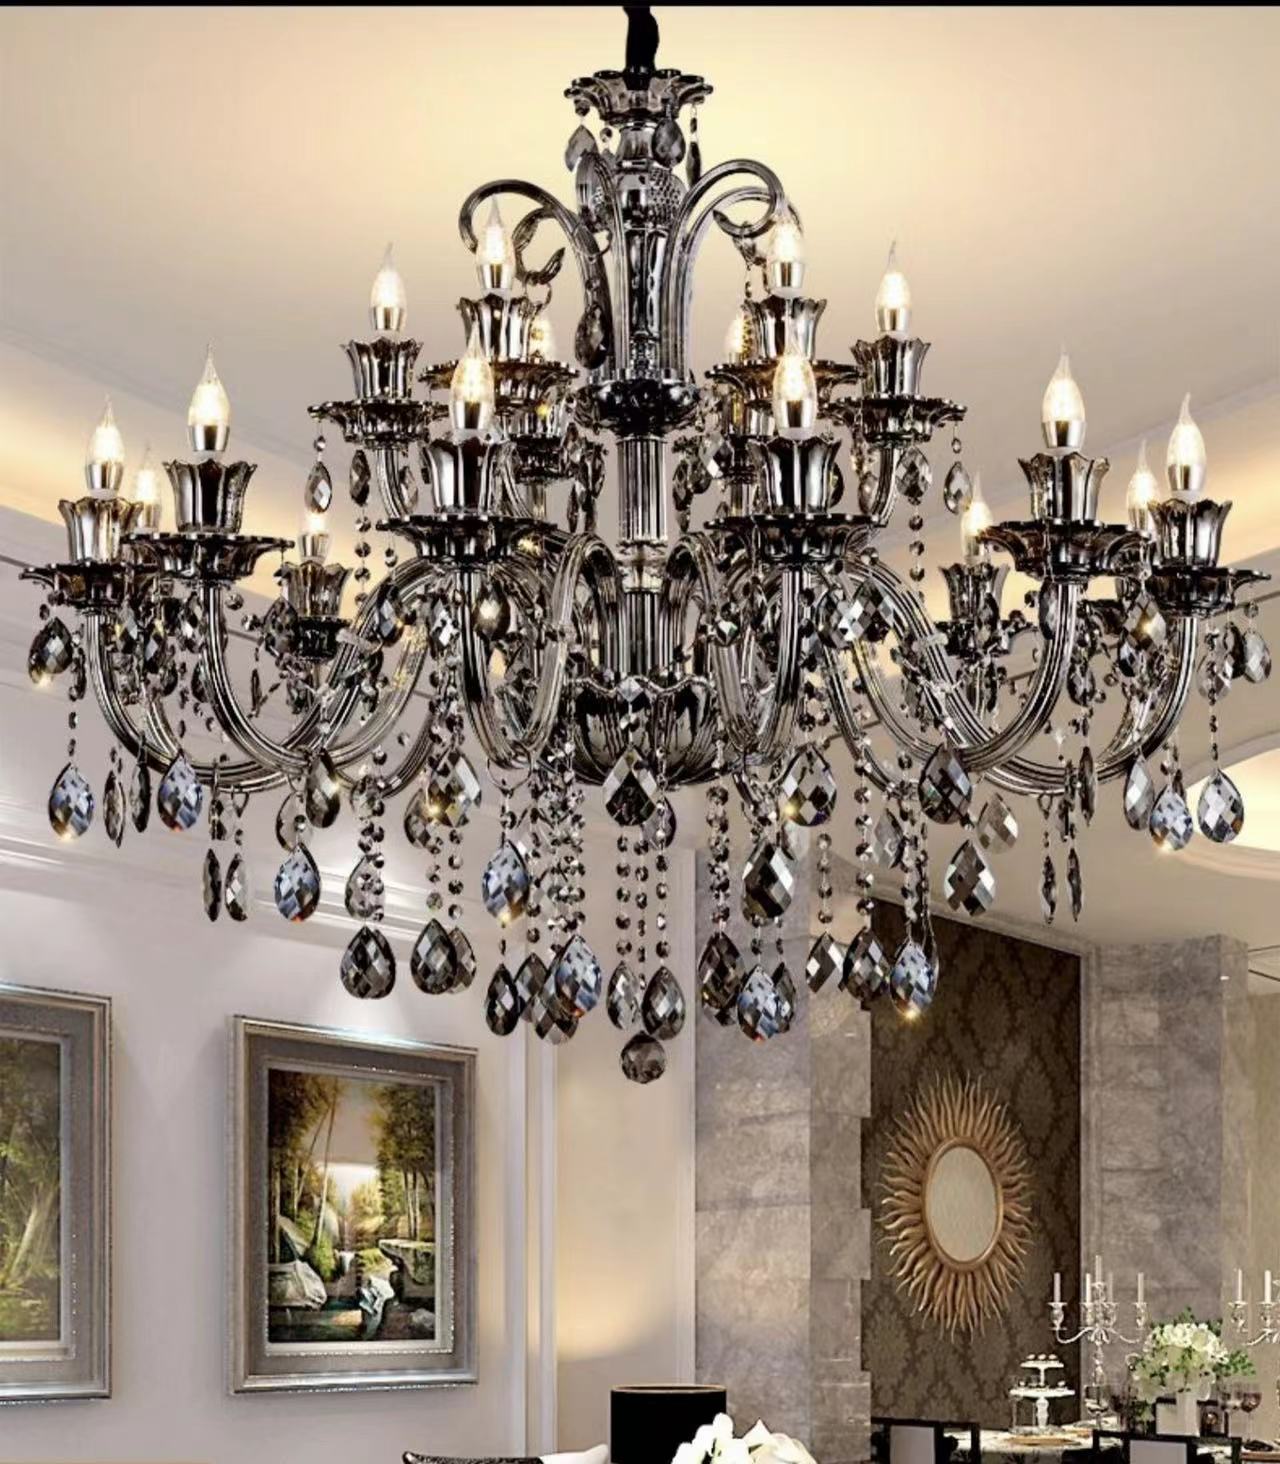 Oversized Modern Vintage Crystal Chandelier With Electronic Candle & Curved Arm & Raindrop Chandelier For Living /Dining Room/ Bedroom